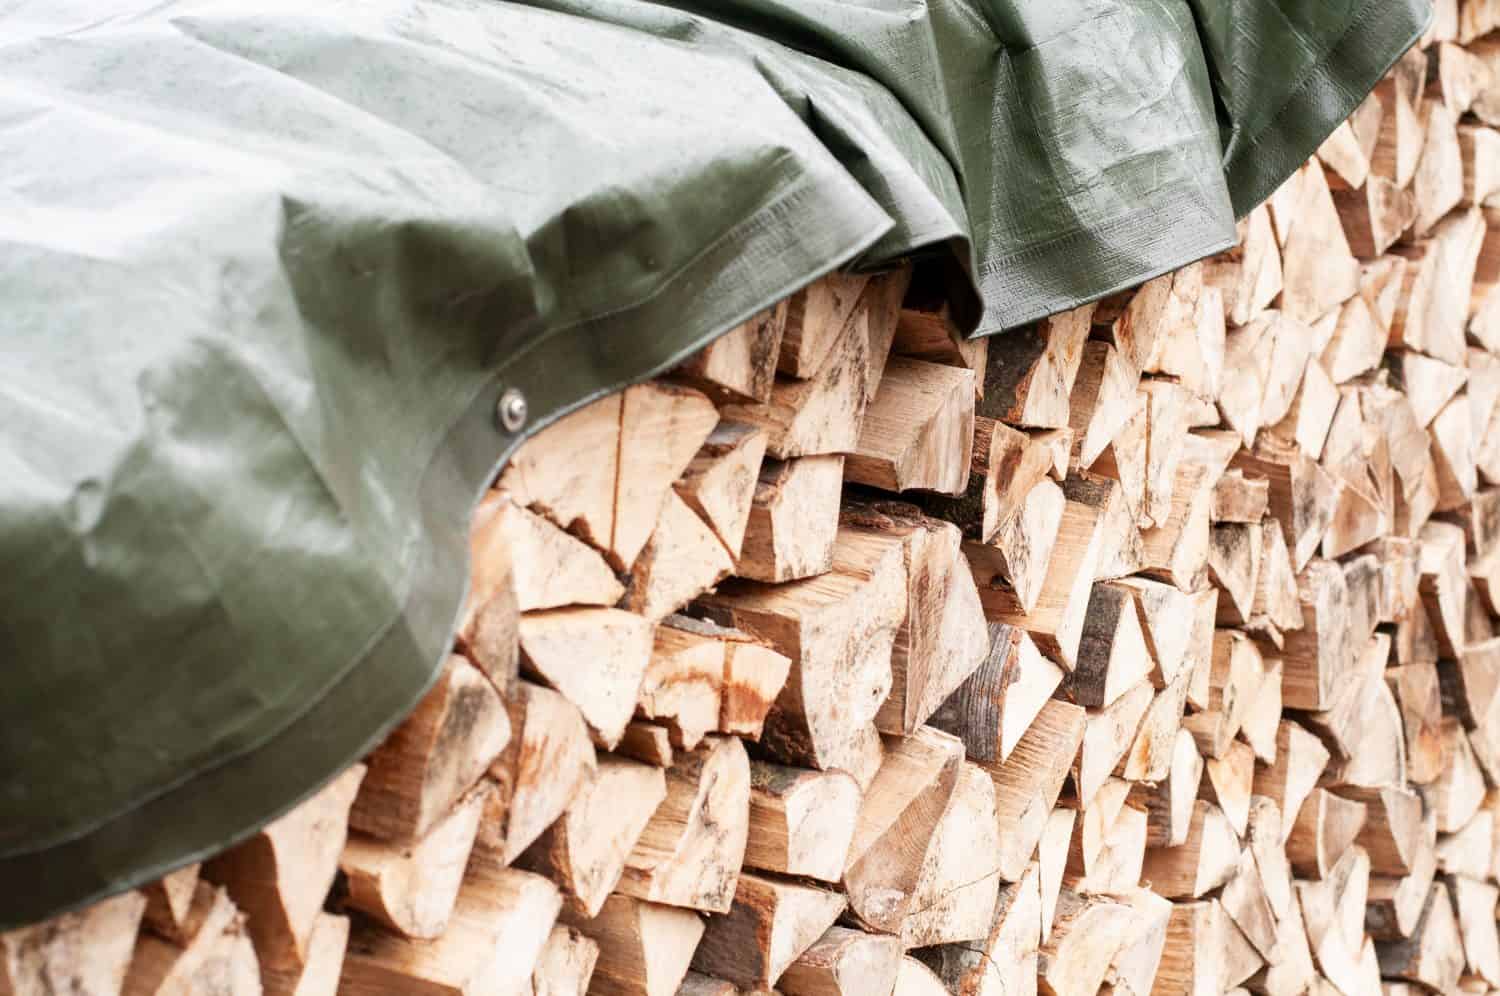 close-up of a stack of chopped firewood covered with a tarpaulin